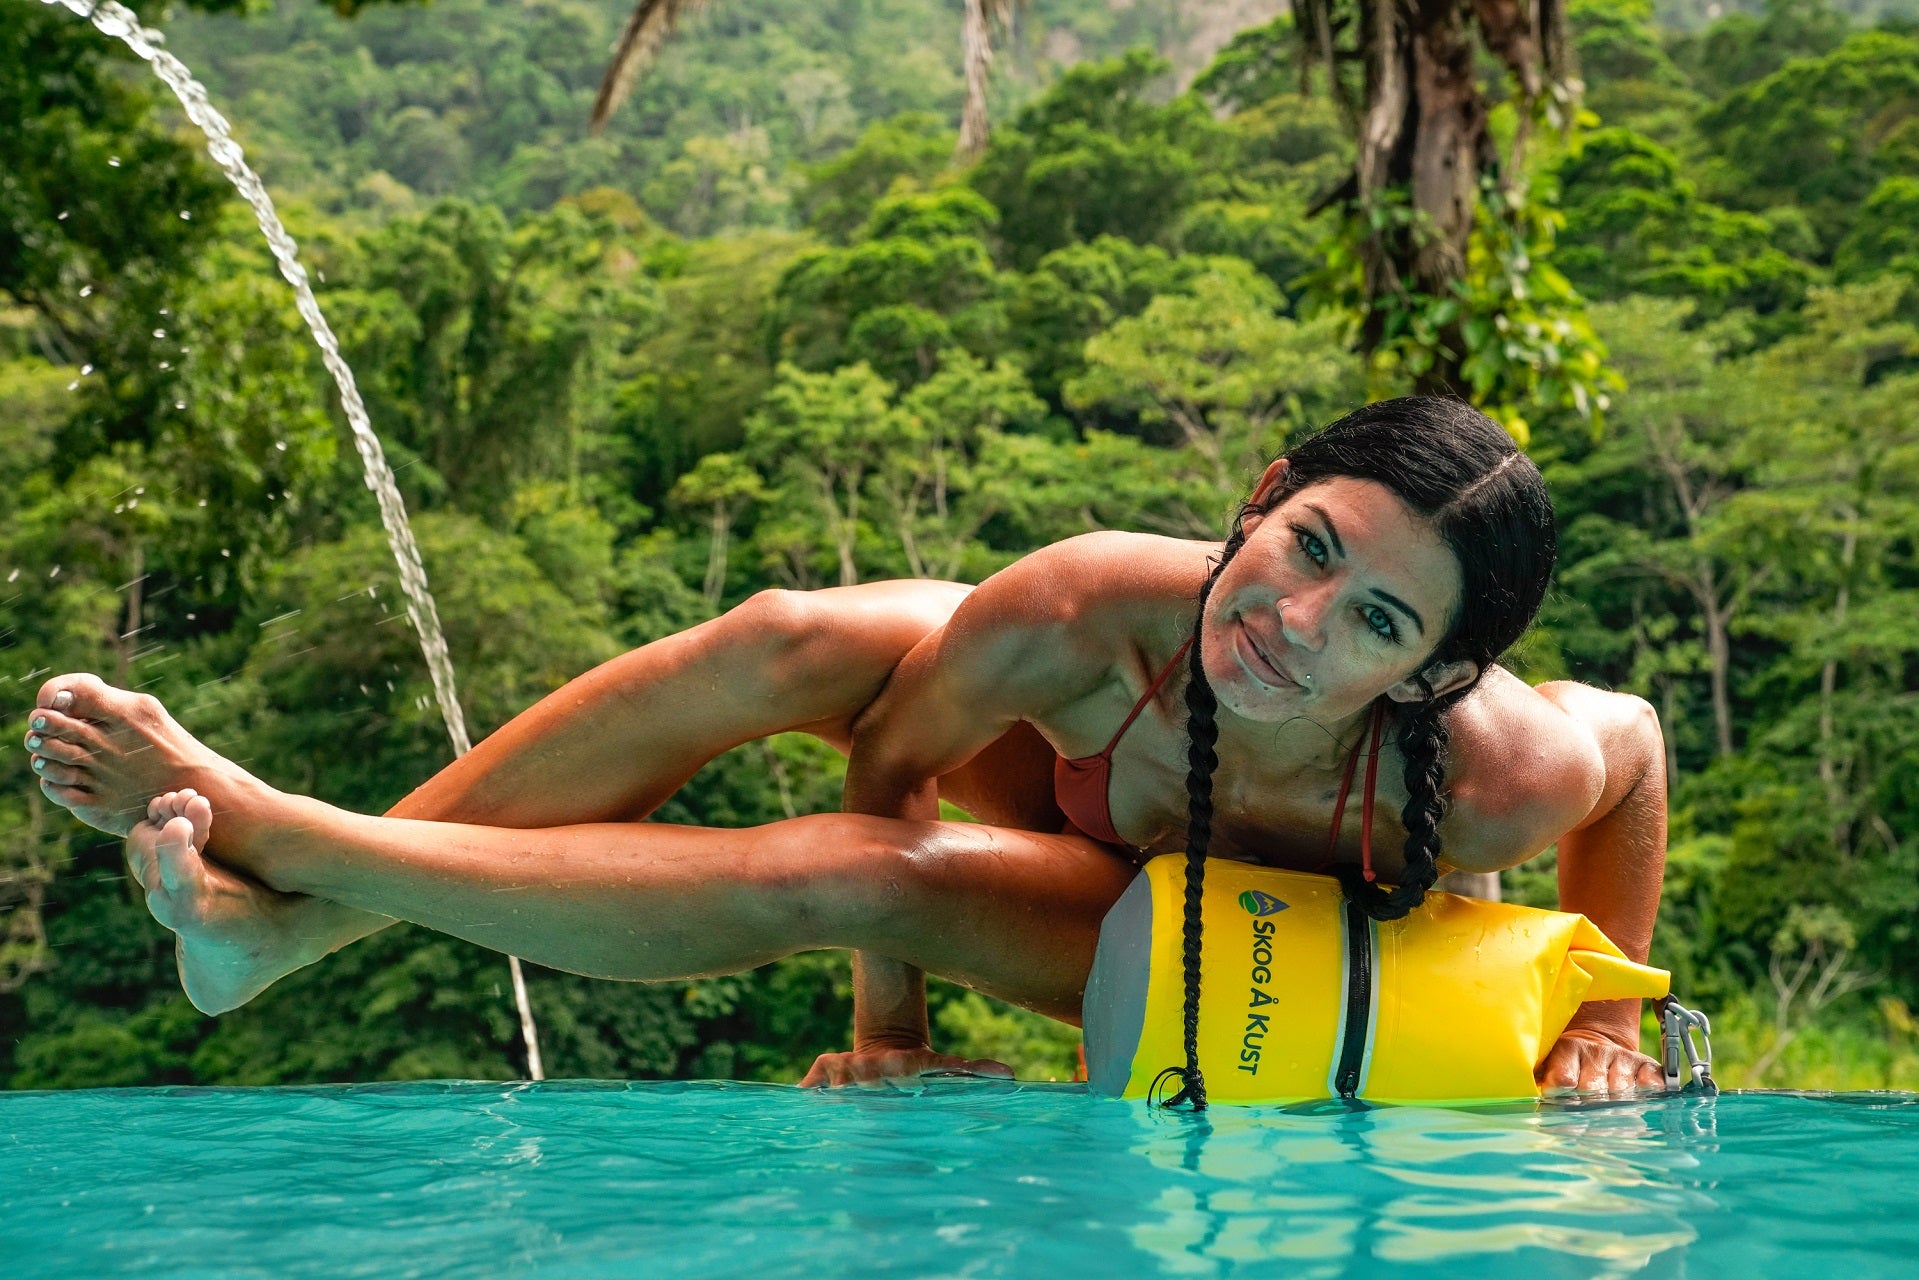 The Skog A Kust yellow 10L DrySak waterproof dry bag being used to protect personal gear while exercising in the water with a jungle background